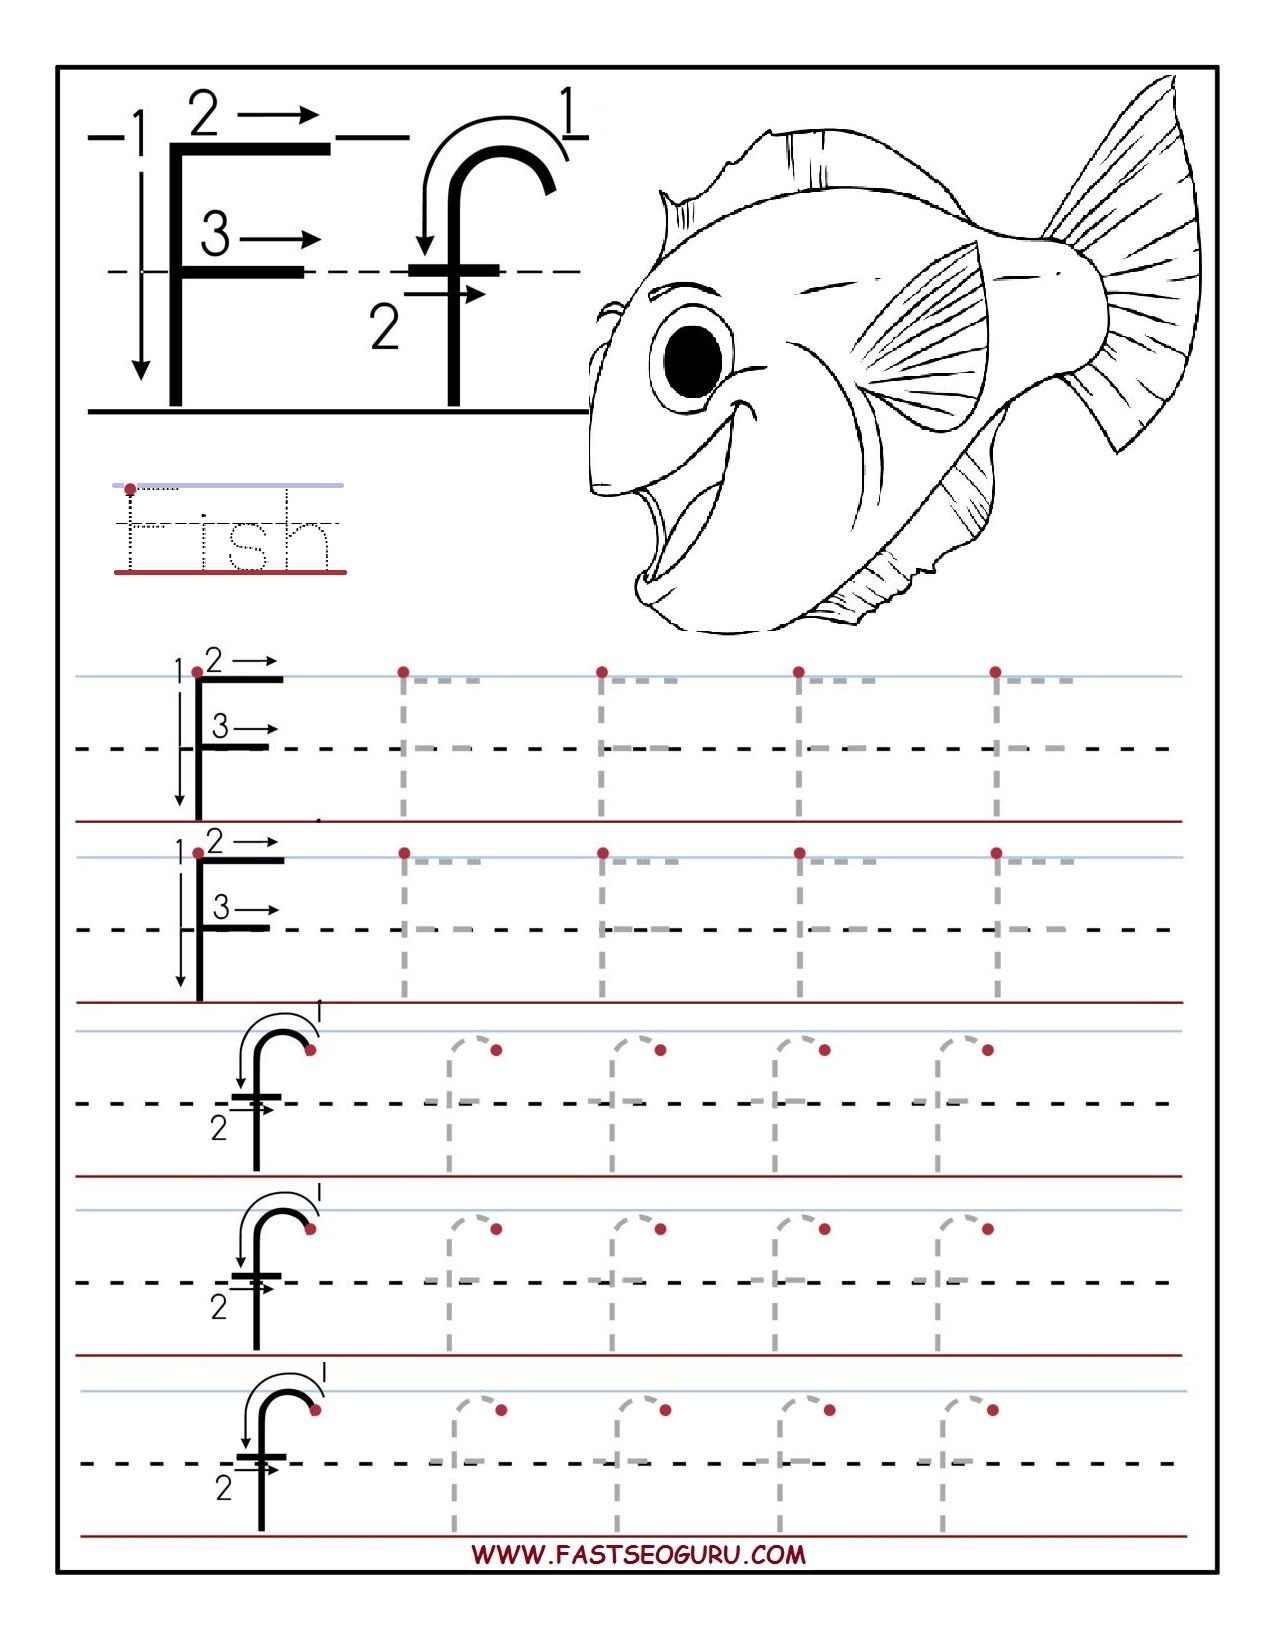 Printable Letter F Tracing Worksheets For Preschool within Letter F Worksheets For Pre K